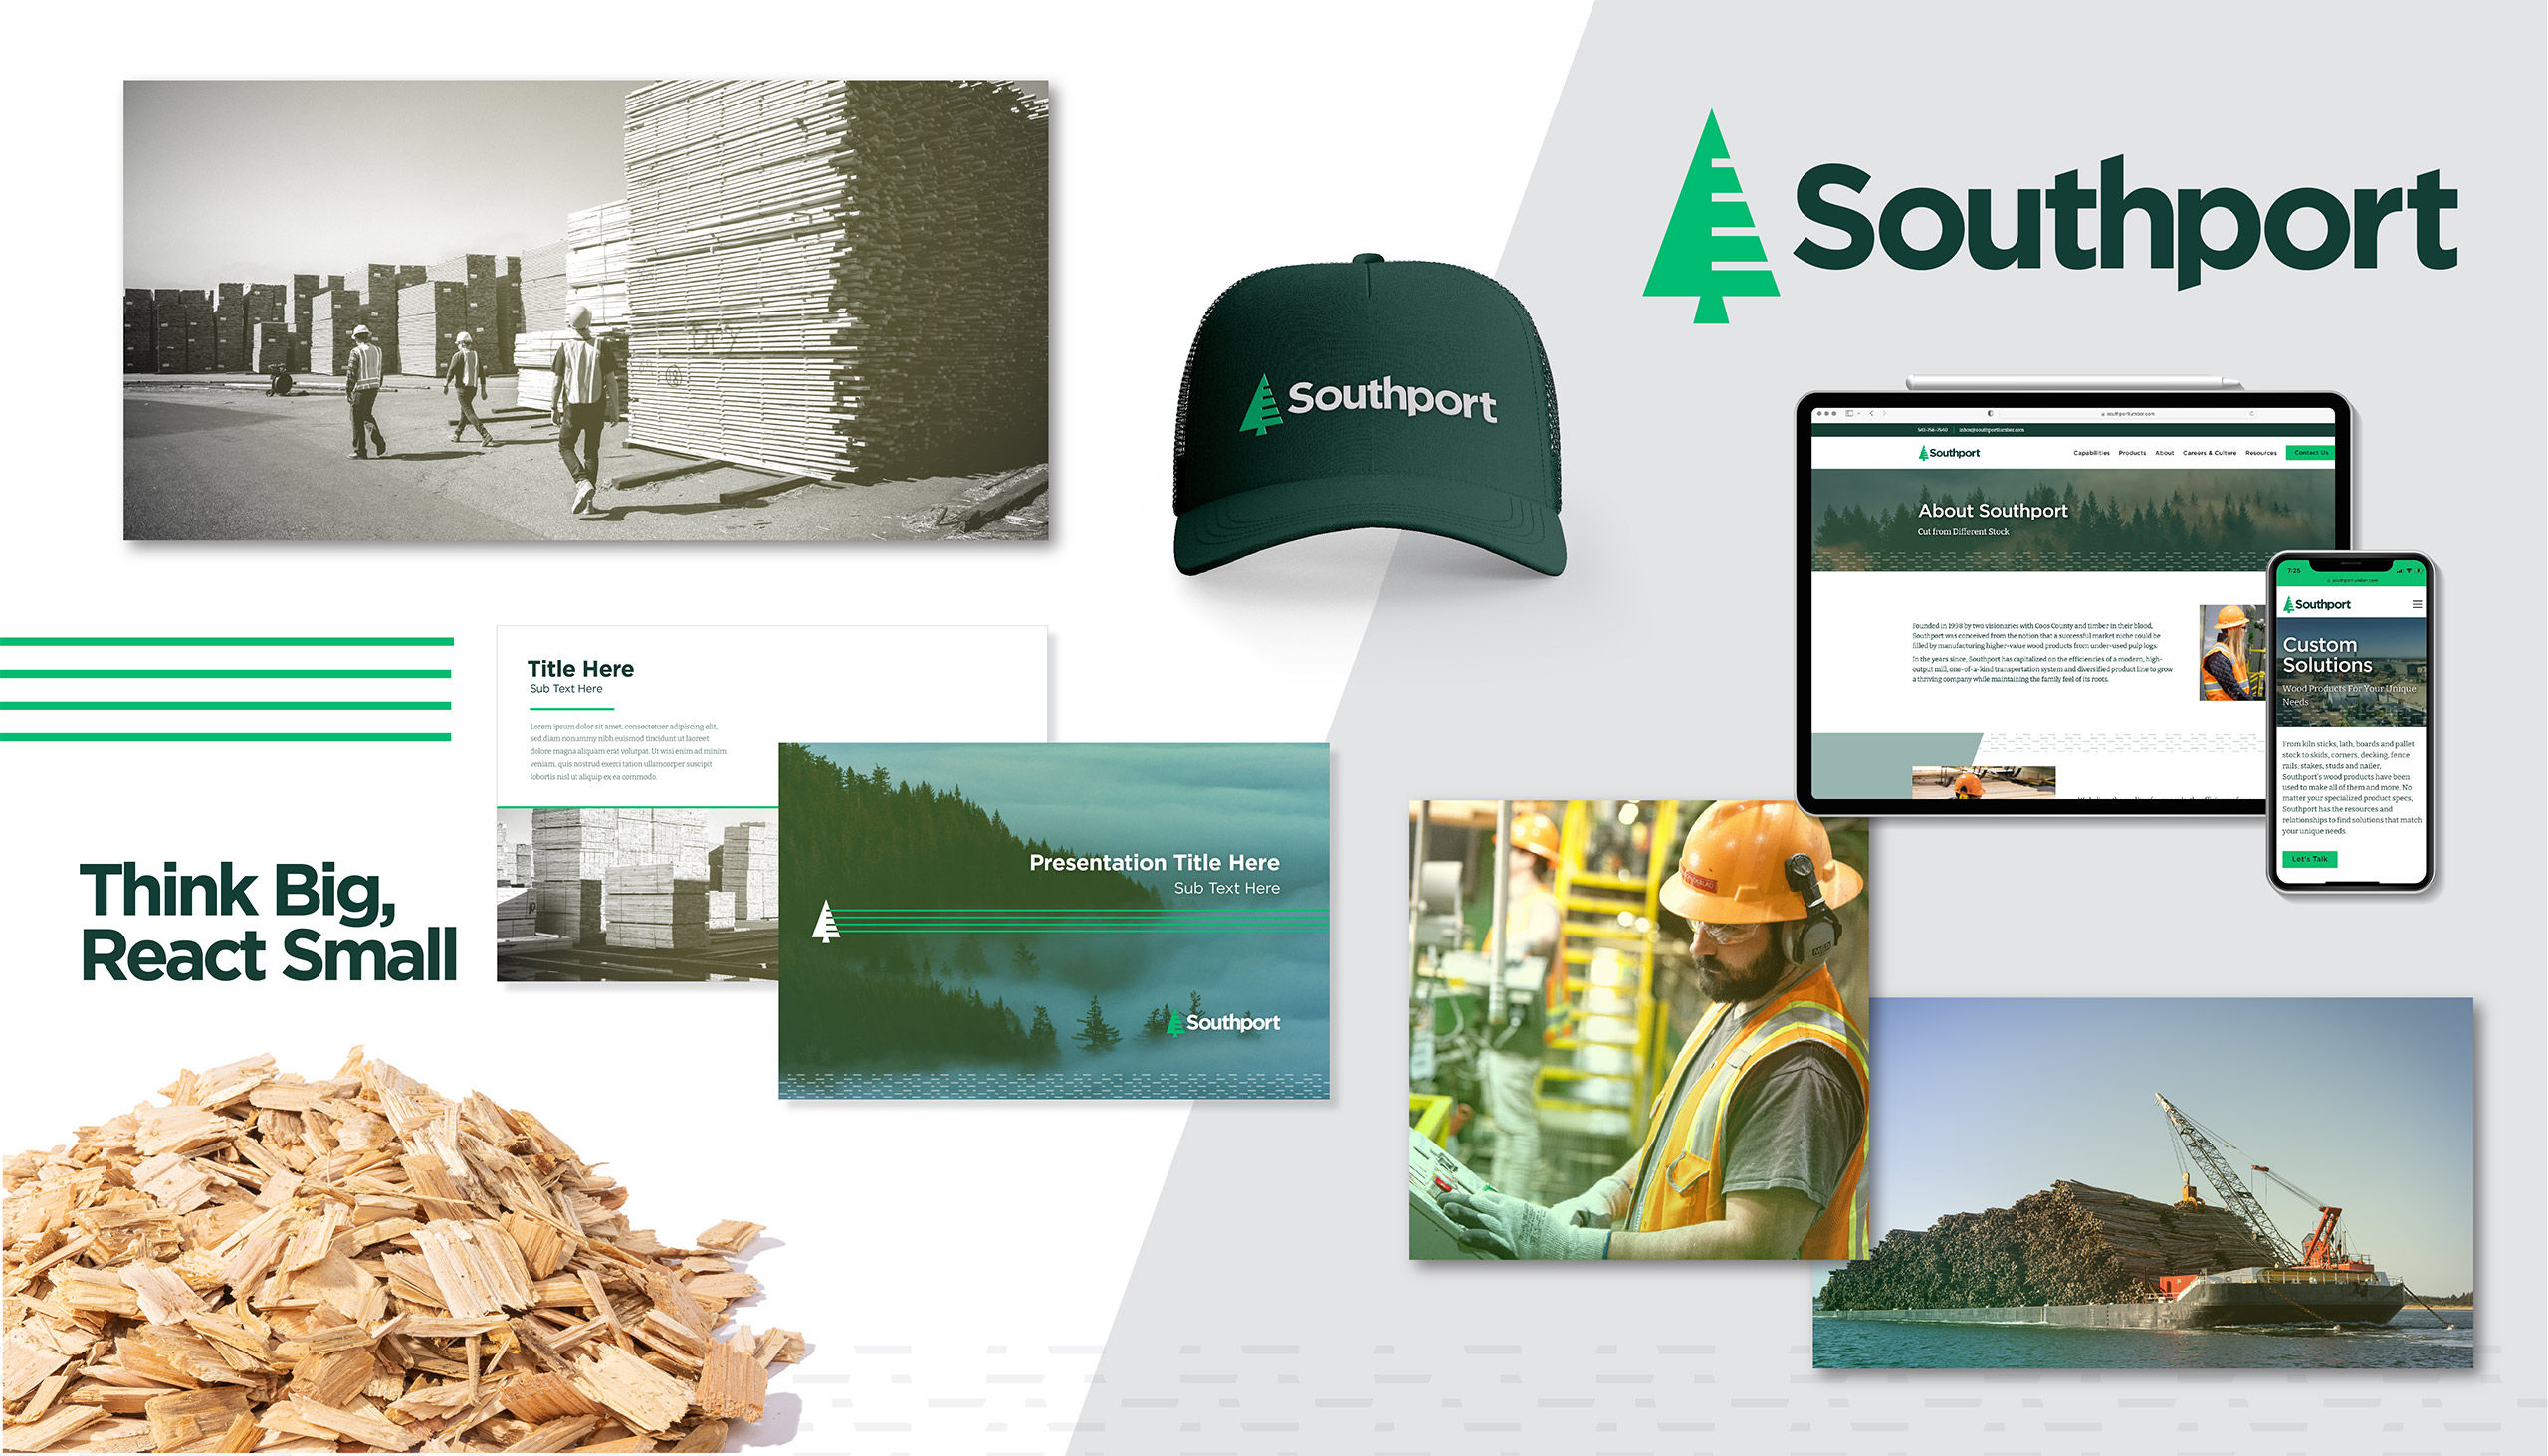 Southport brand collage